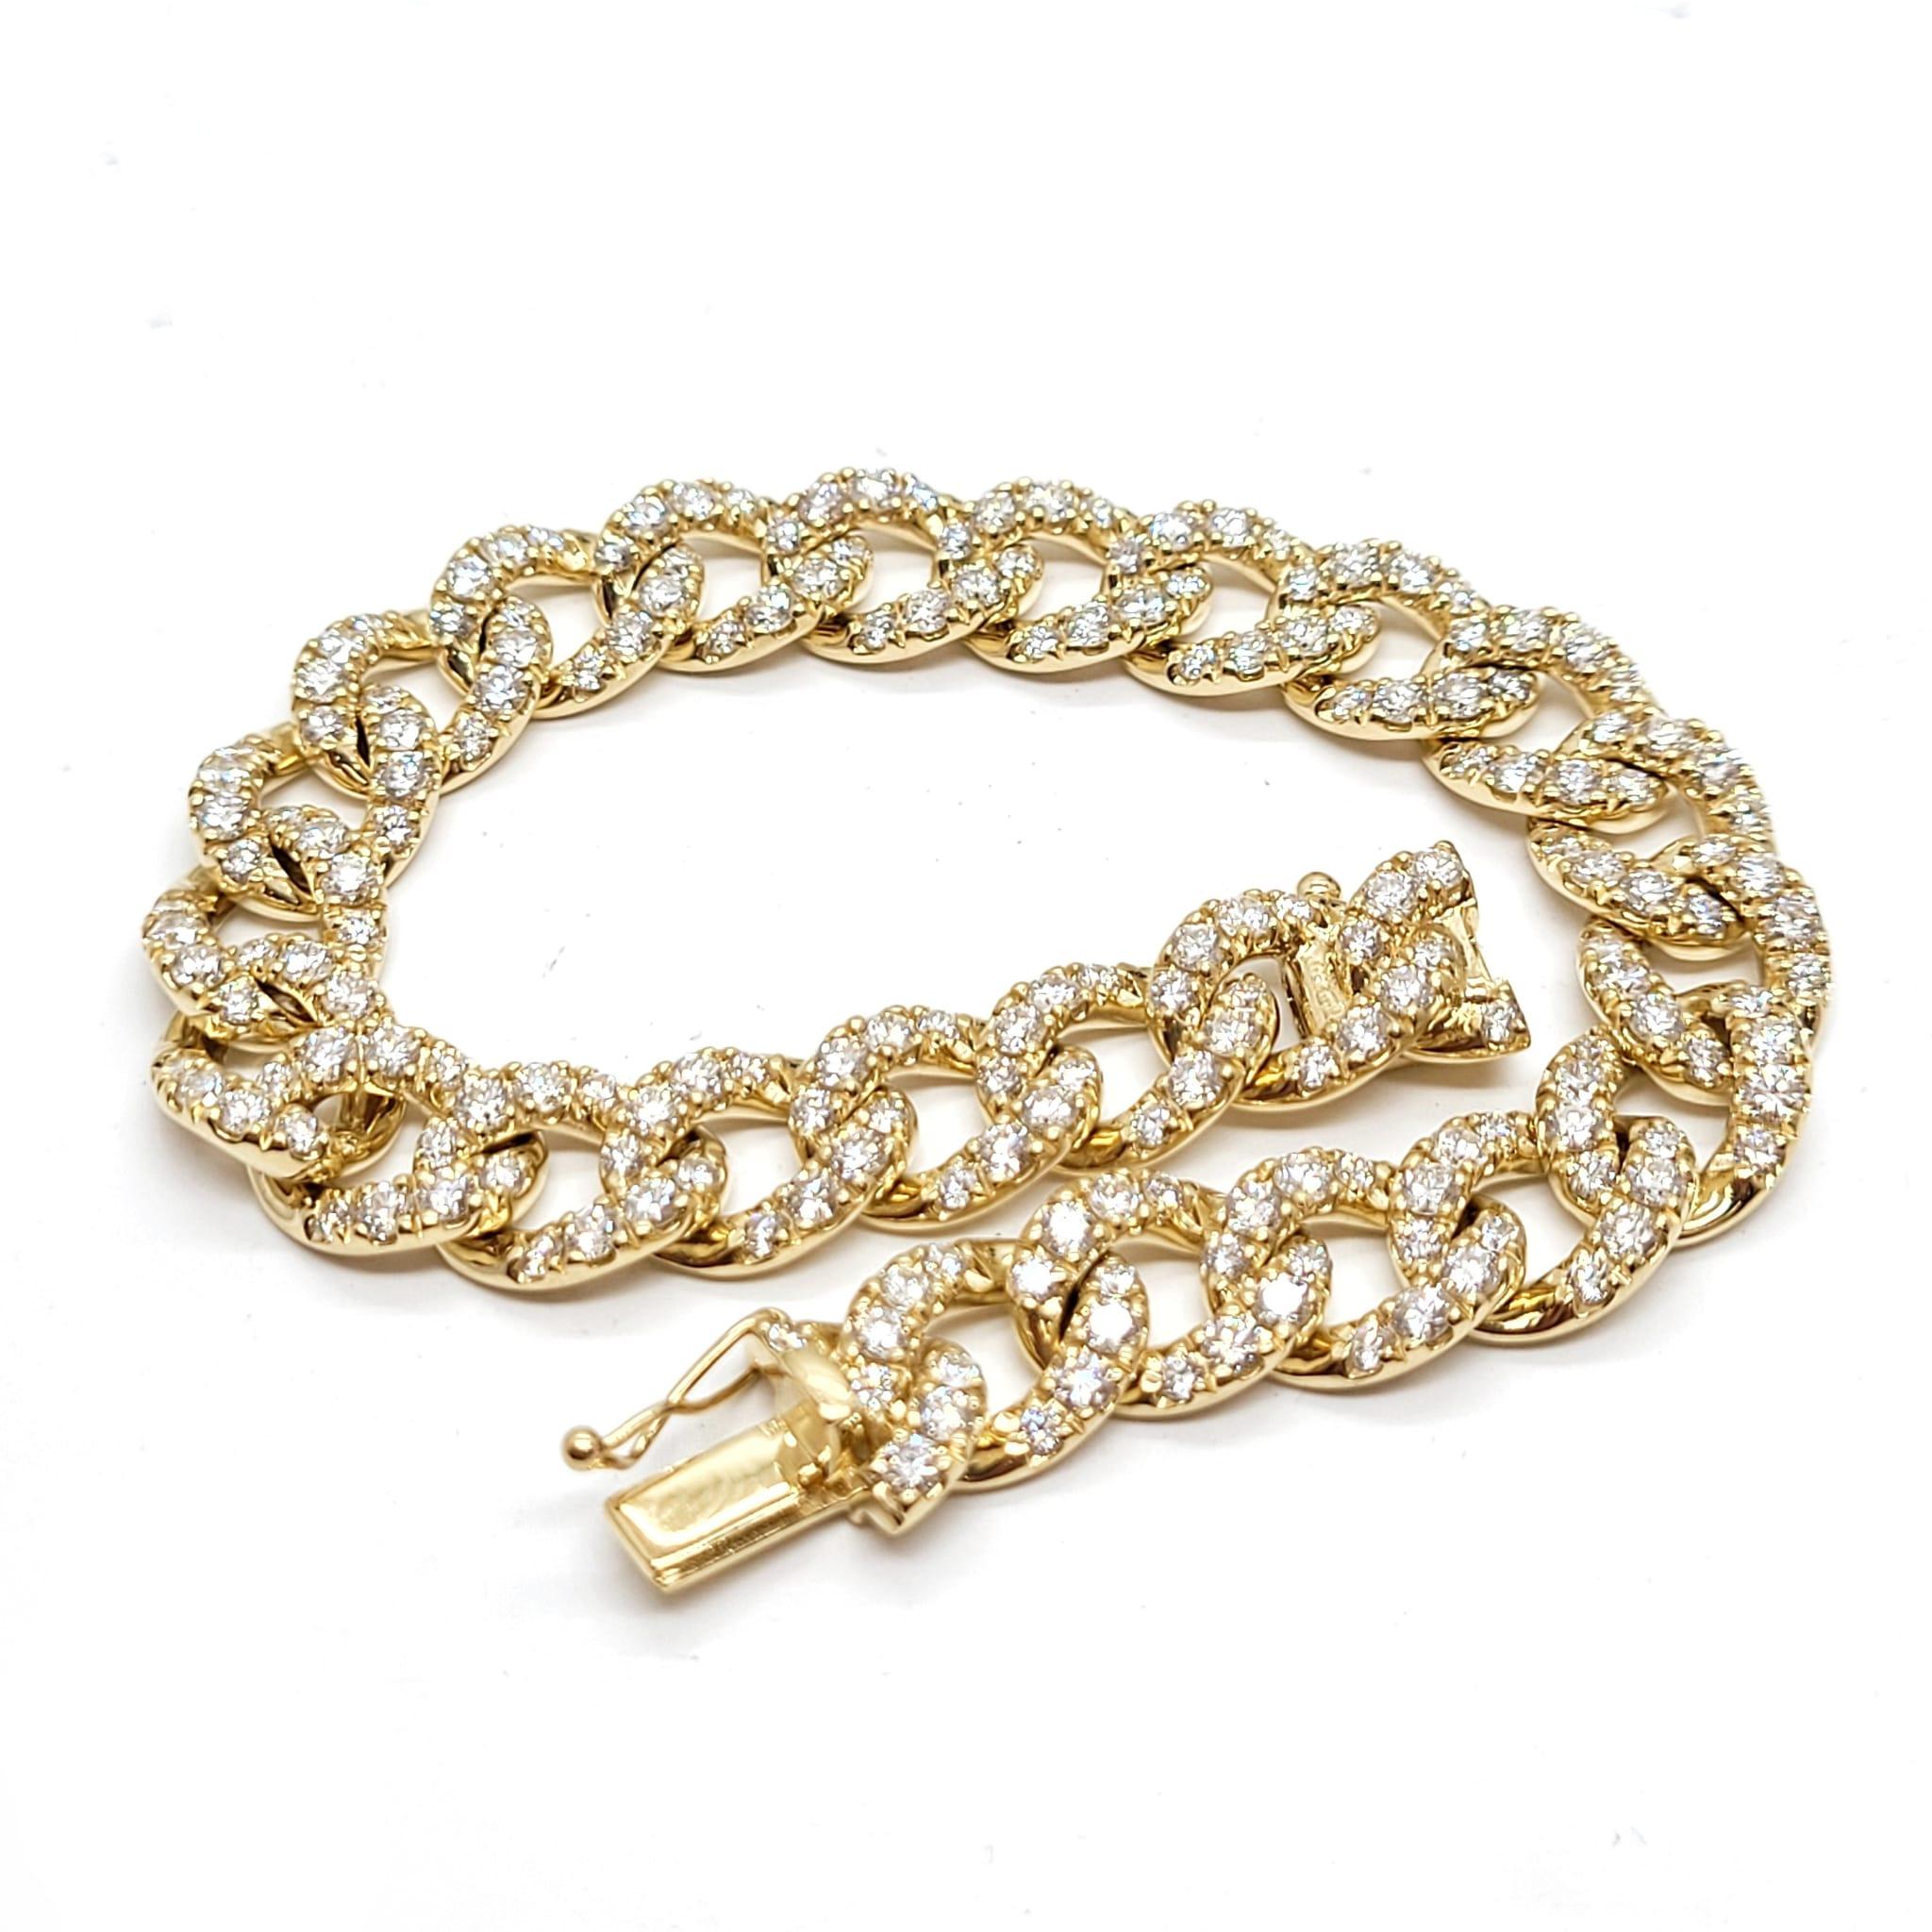 Andreoli Yellow Gold And Diamond Link Bracelet 

This Bracelet Features :
6.00 ct diamonds
32.96 g 18K Gold
Made In Italy 